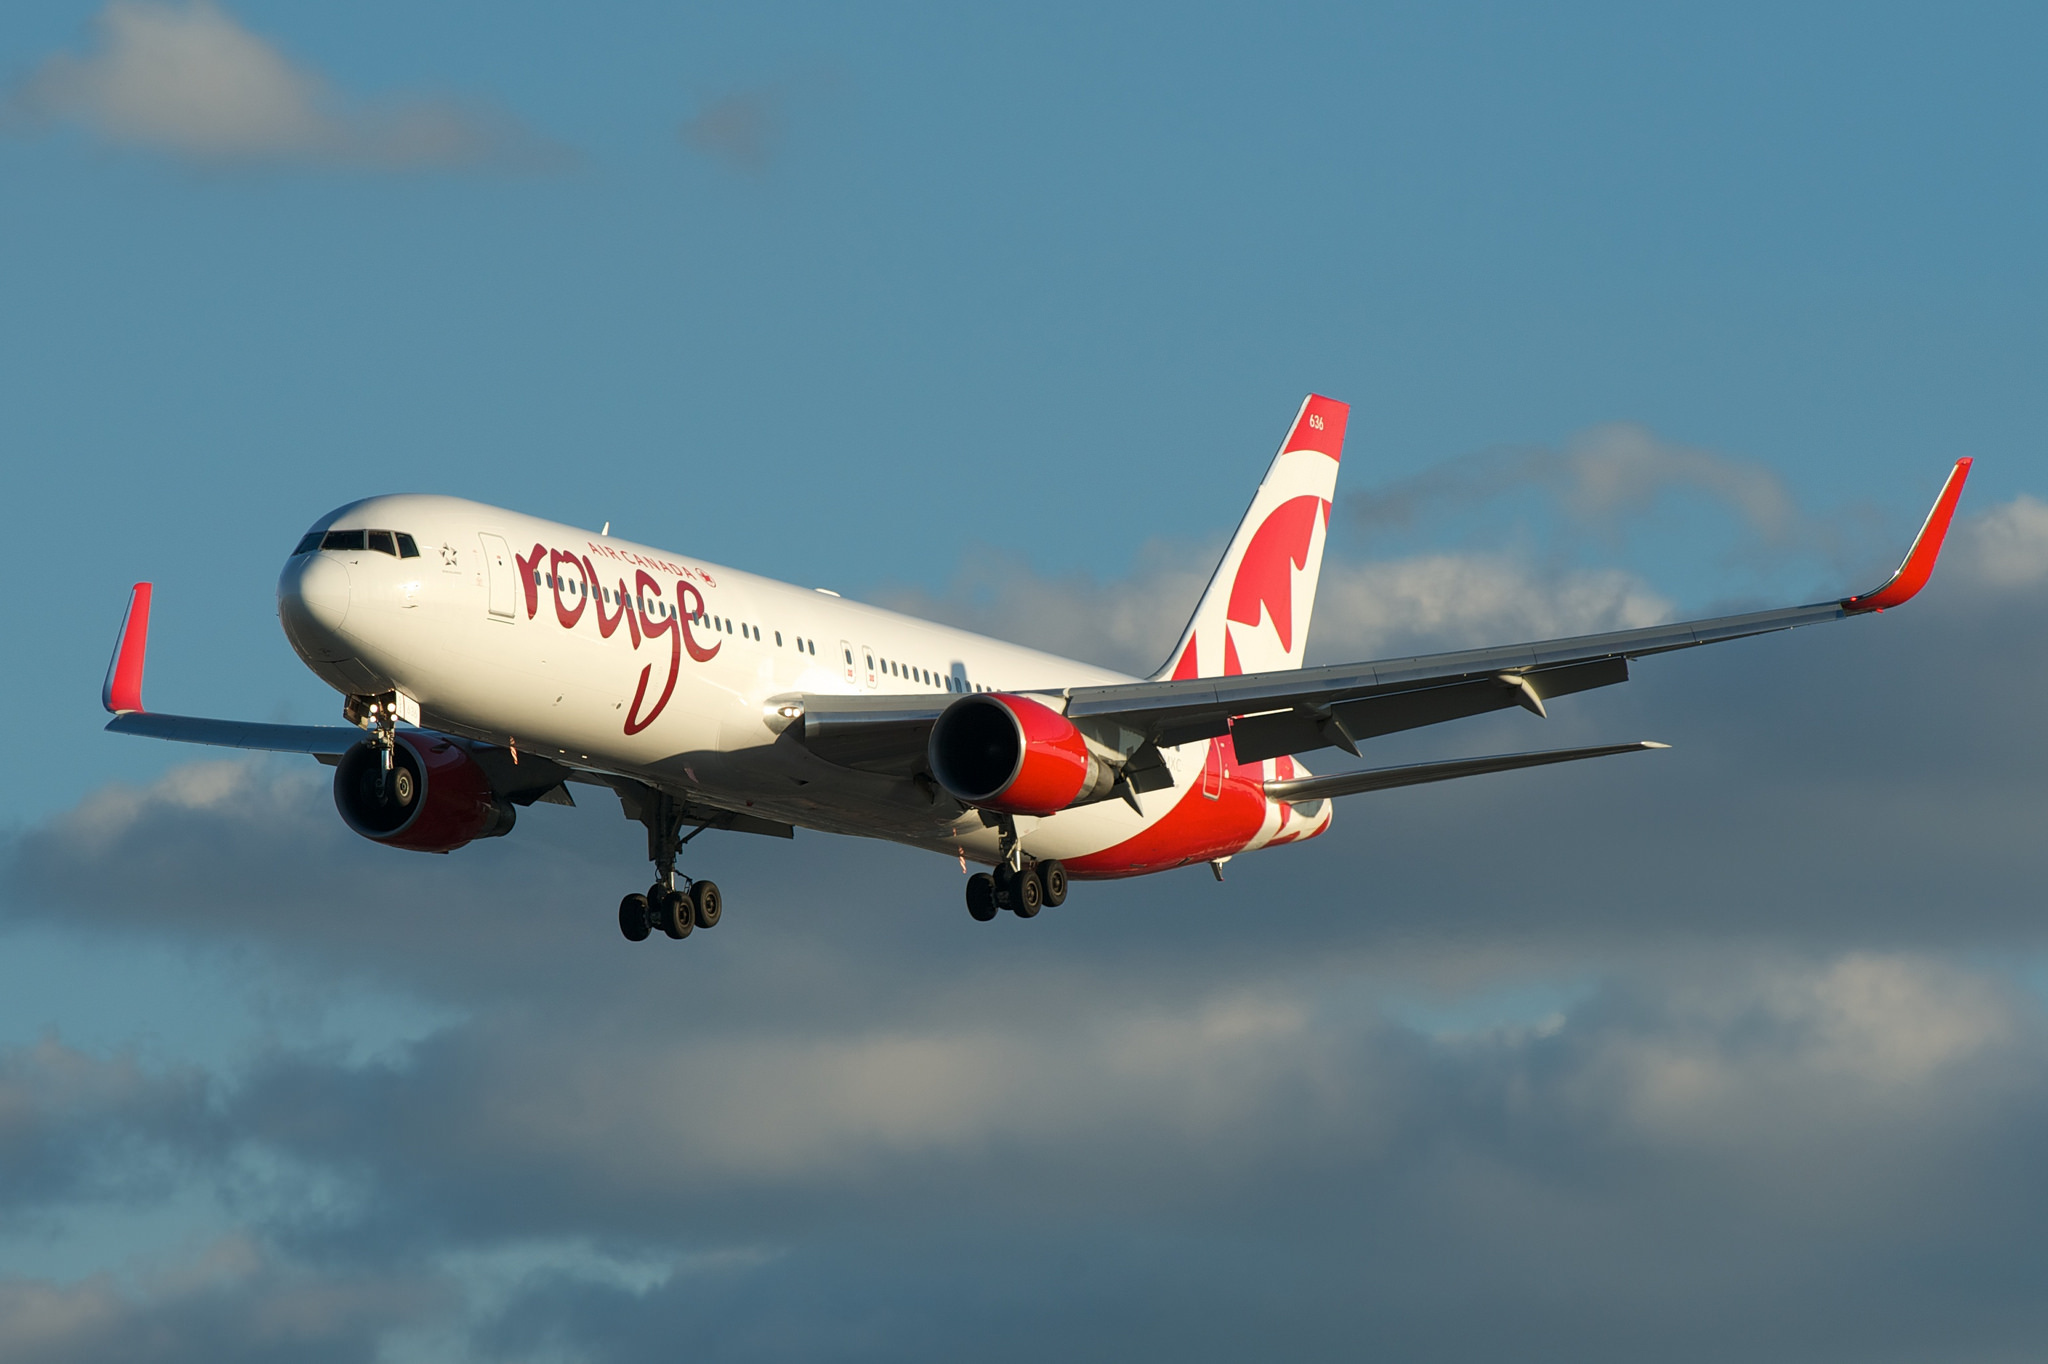 Air Canada rouge Boeing 767-300 C-FMXC par BriYYZ sous (CC BY-SA 2.0) https://www.flickr.com/photos/bribri/14430150595/ https://creativecommons.org/licenses/by-sa/2.0/